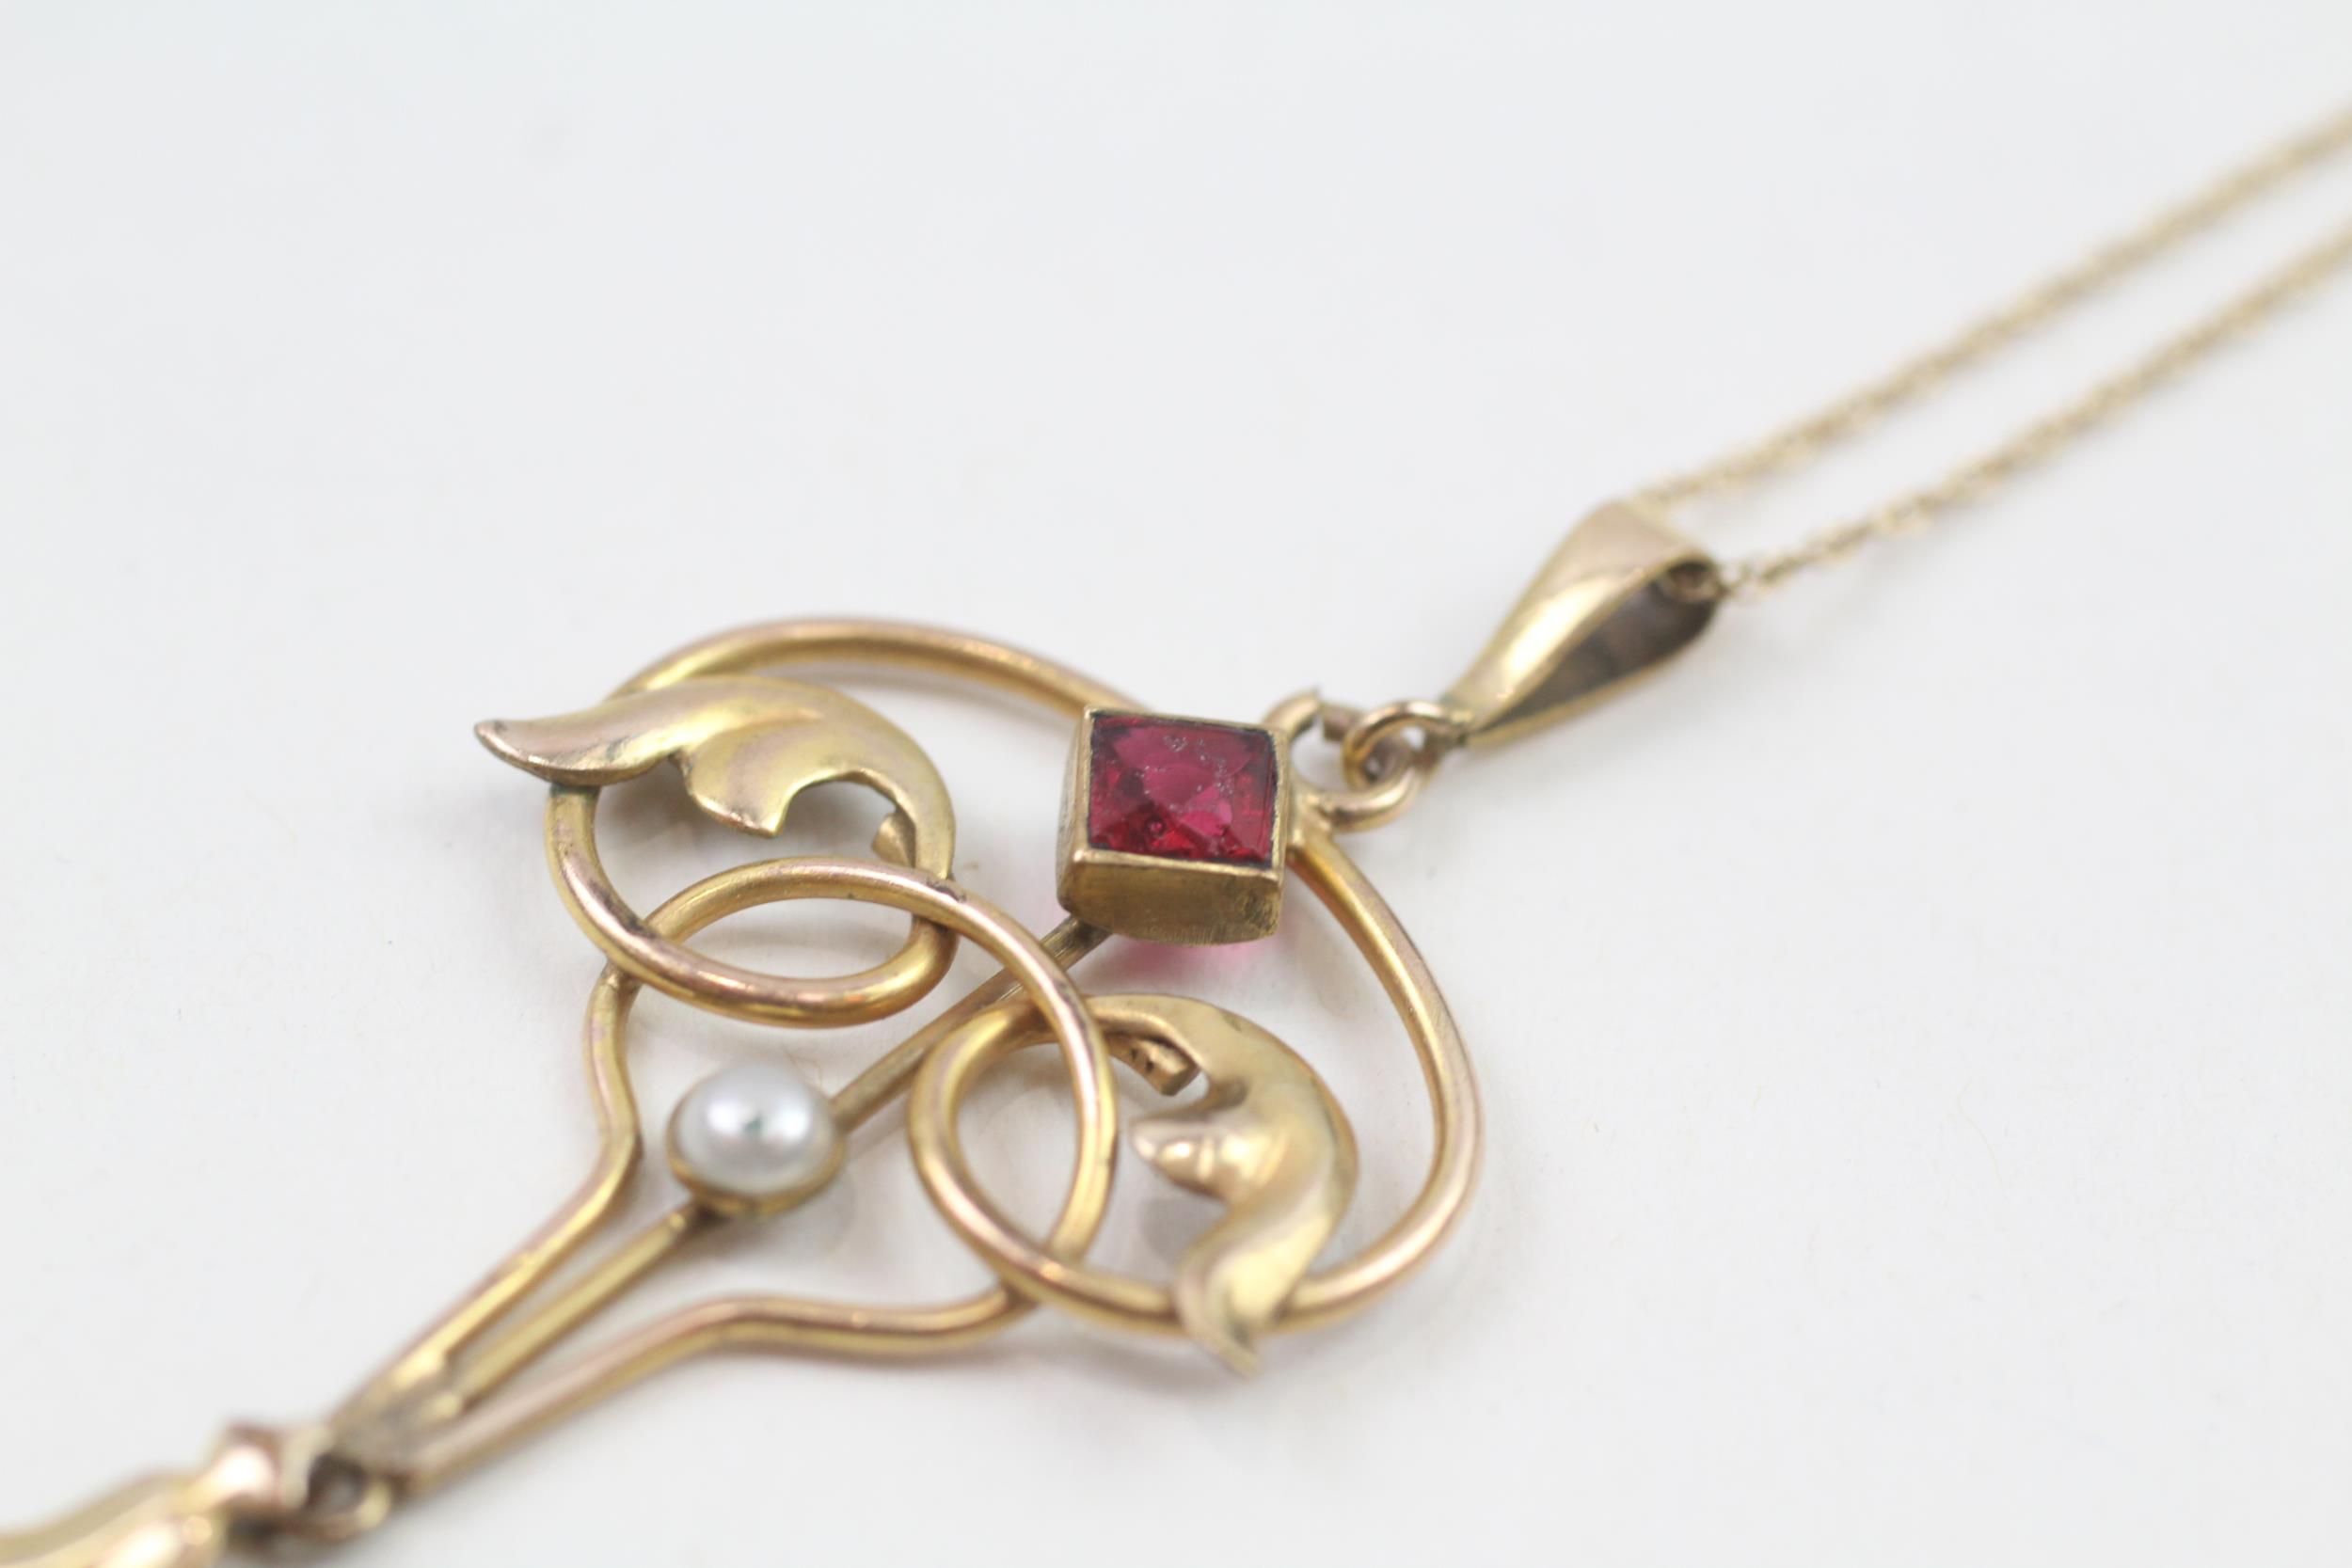 9ct gold antique pearl & garnet paste pendant necklace with later chain (3.1g) - Image 2 of 5